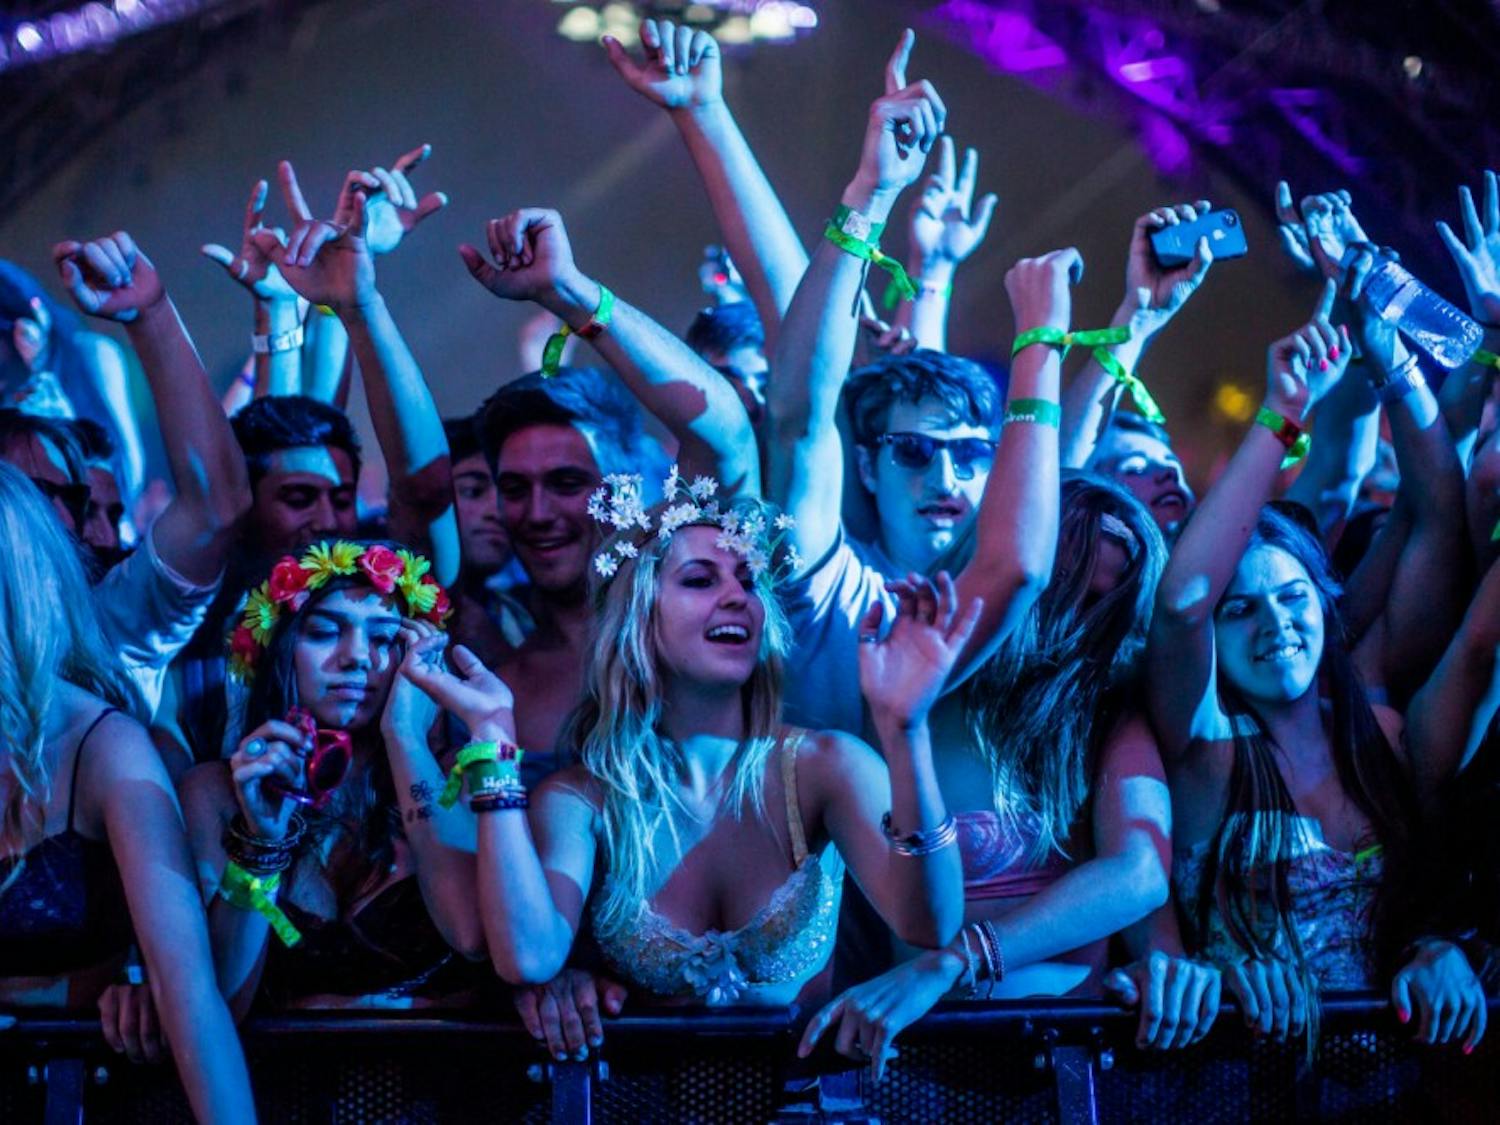 Coachella attendees enjoy contemporary music and extensive water consumption.